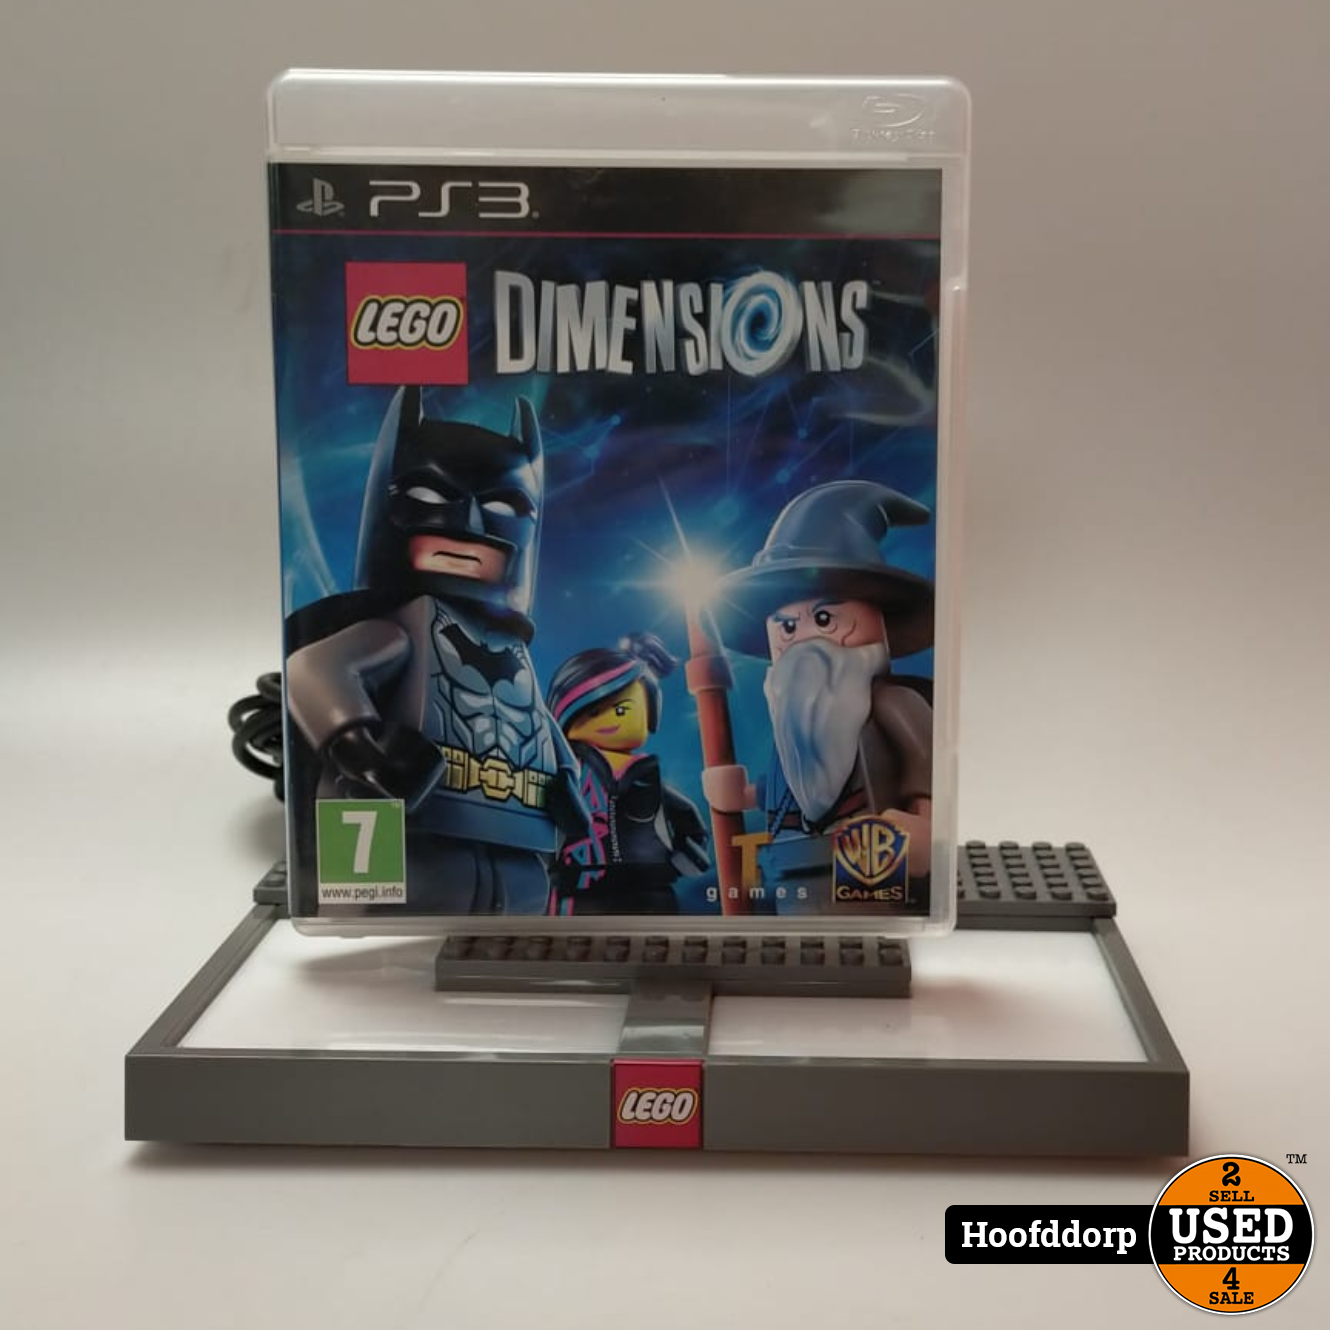 Imitatie kast Twisted Playstation 3 game: Lego Dimension - Used Products Hoofddorp